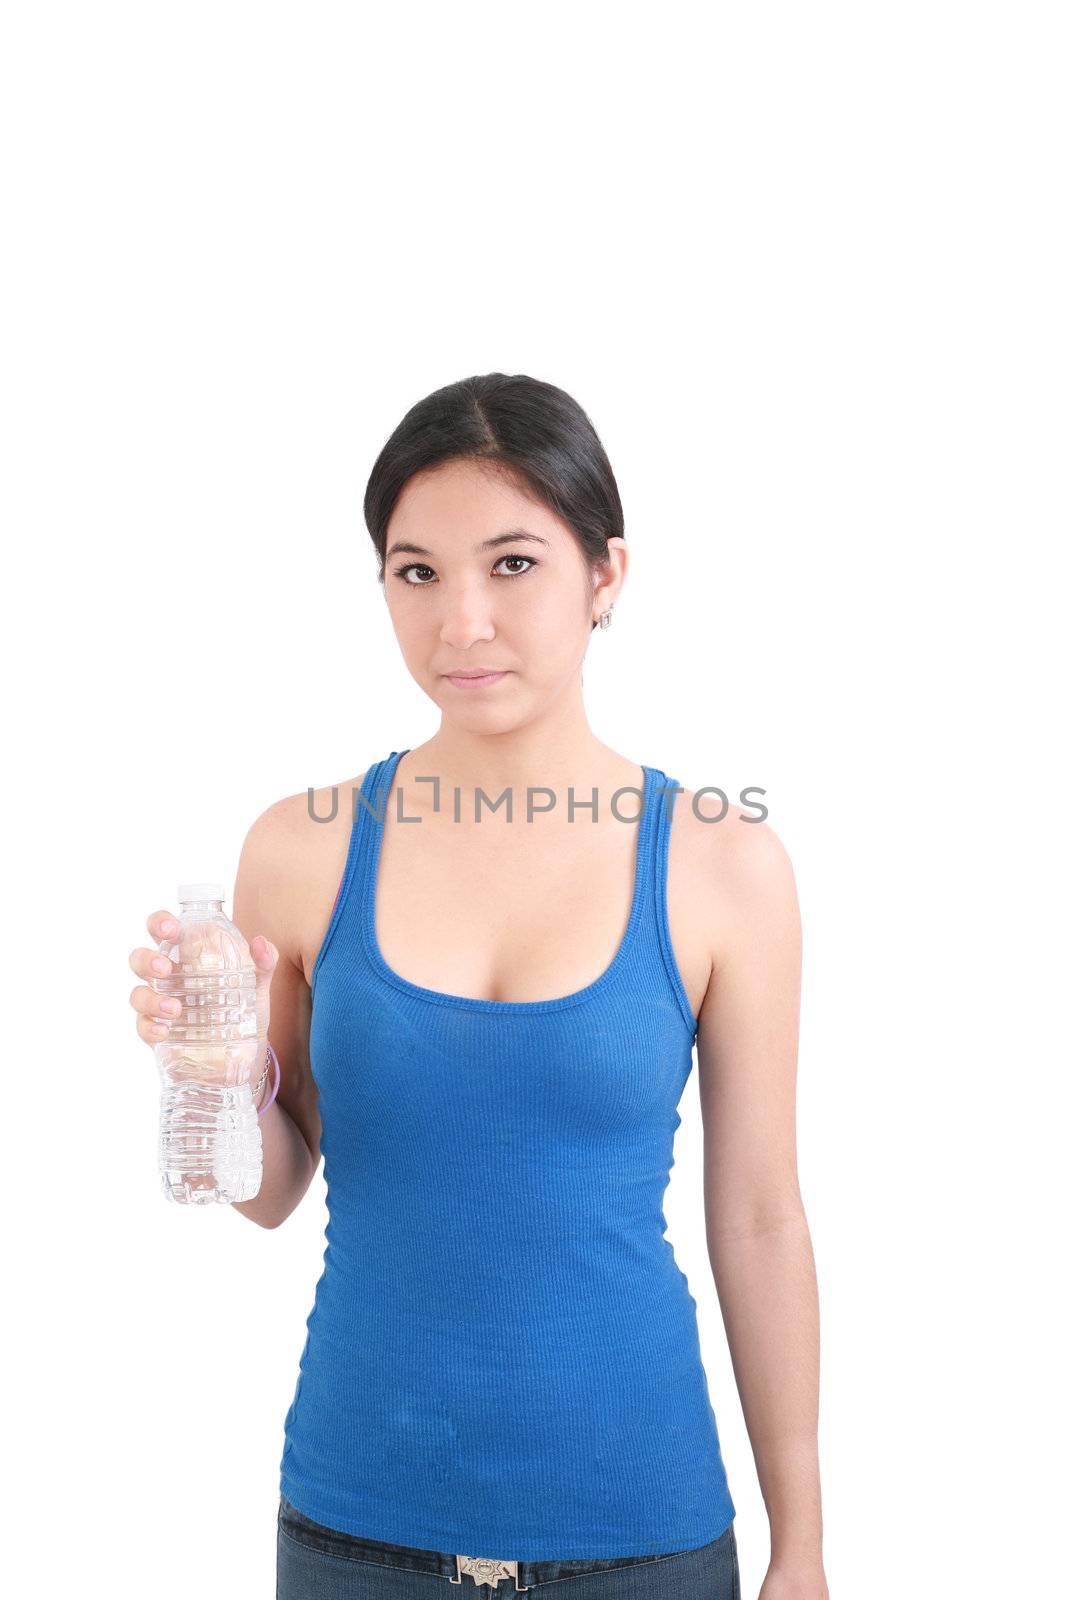 portrait of woman in fitness attire holding water bottle and smiling